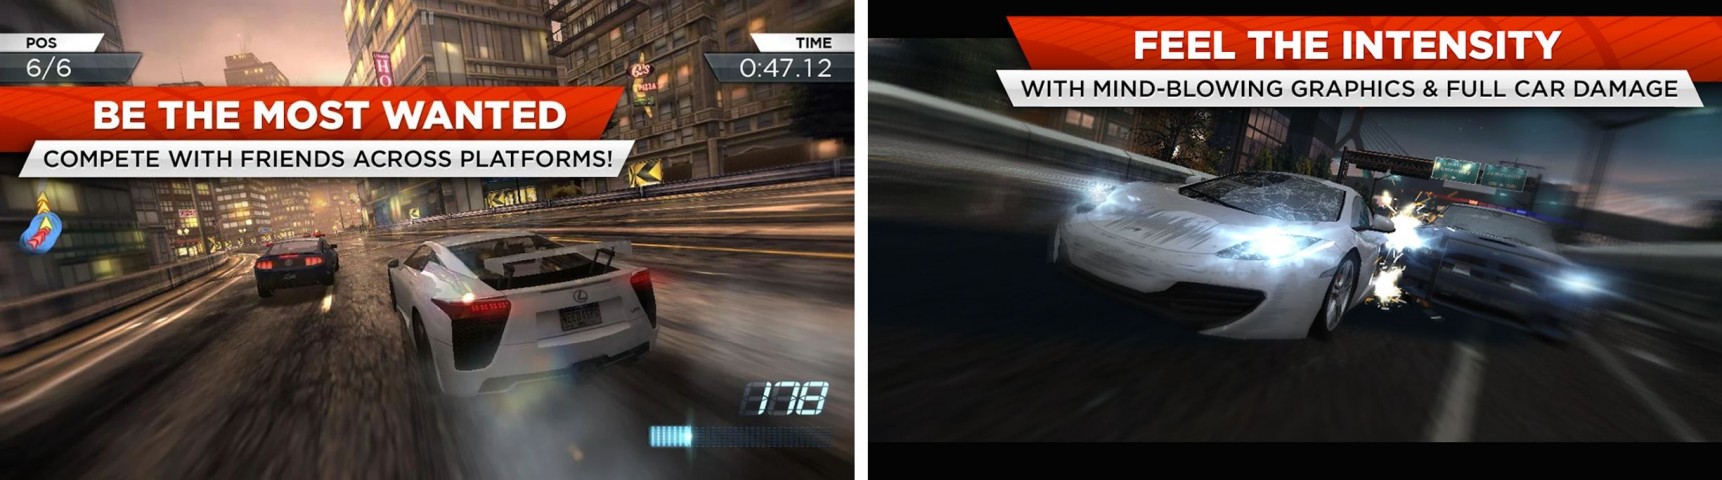 need-for-speed-most-wanted-apk-install.jpg